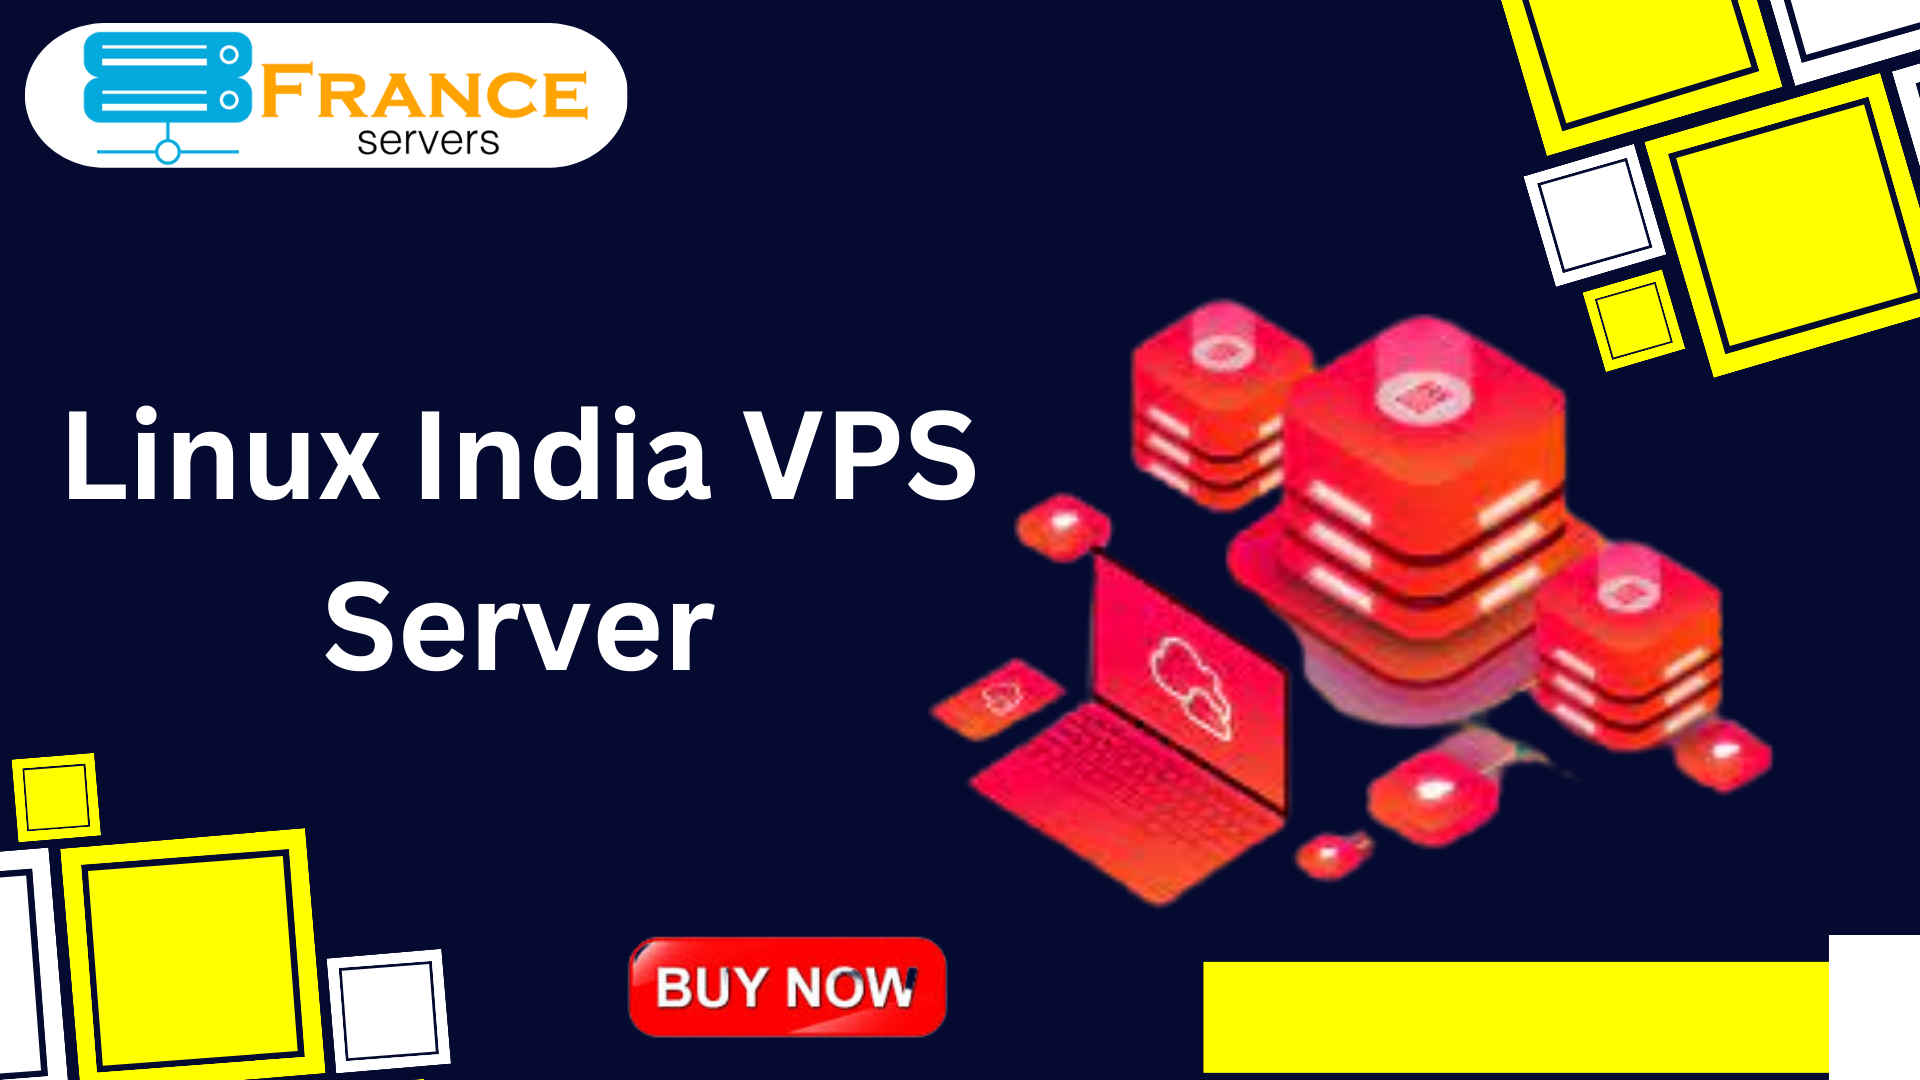 Linux India VPS Server